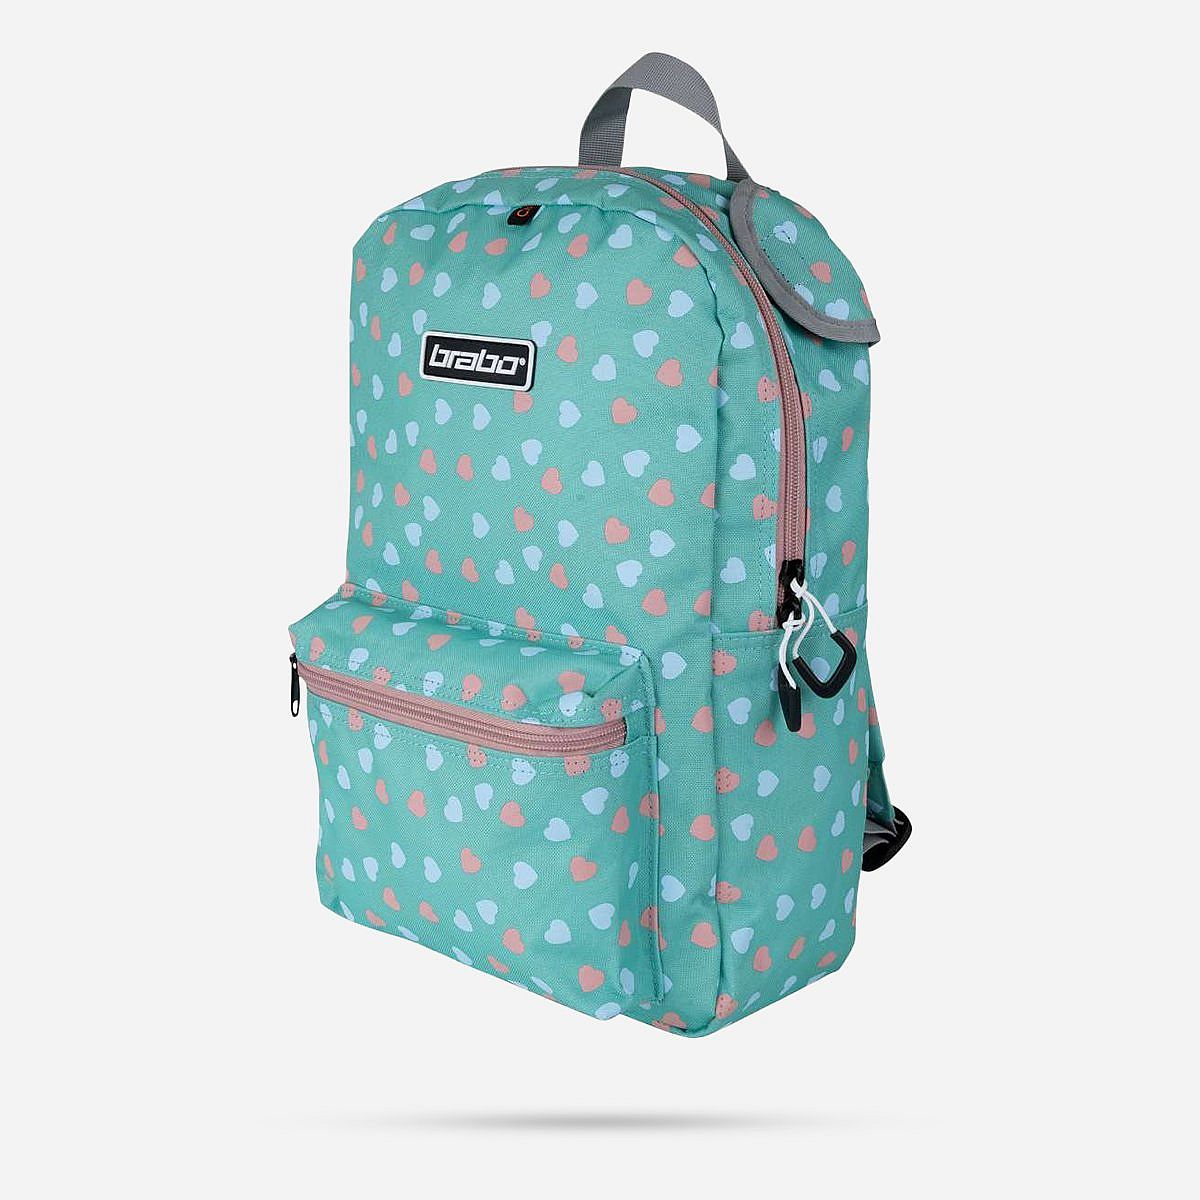 AN303101 5200 Backpack Storm Hearts Turq/p